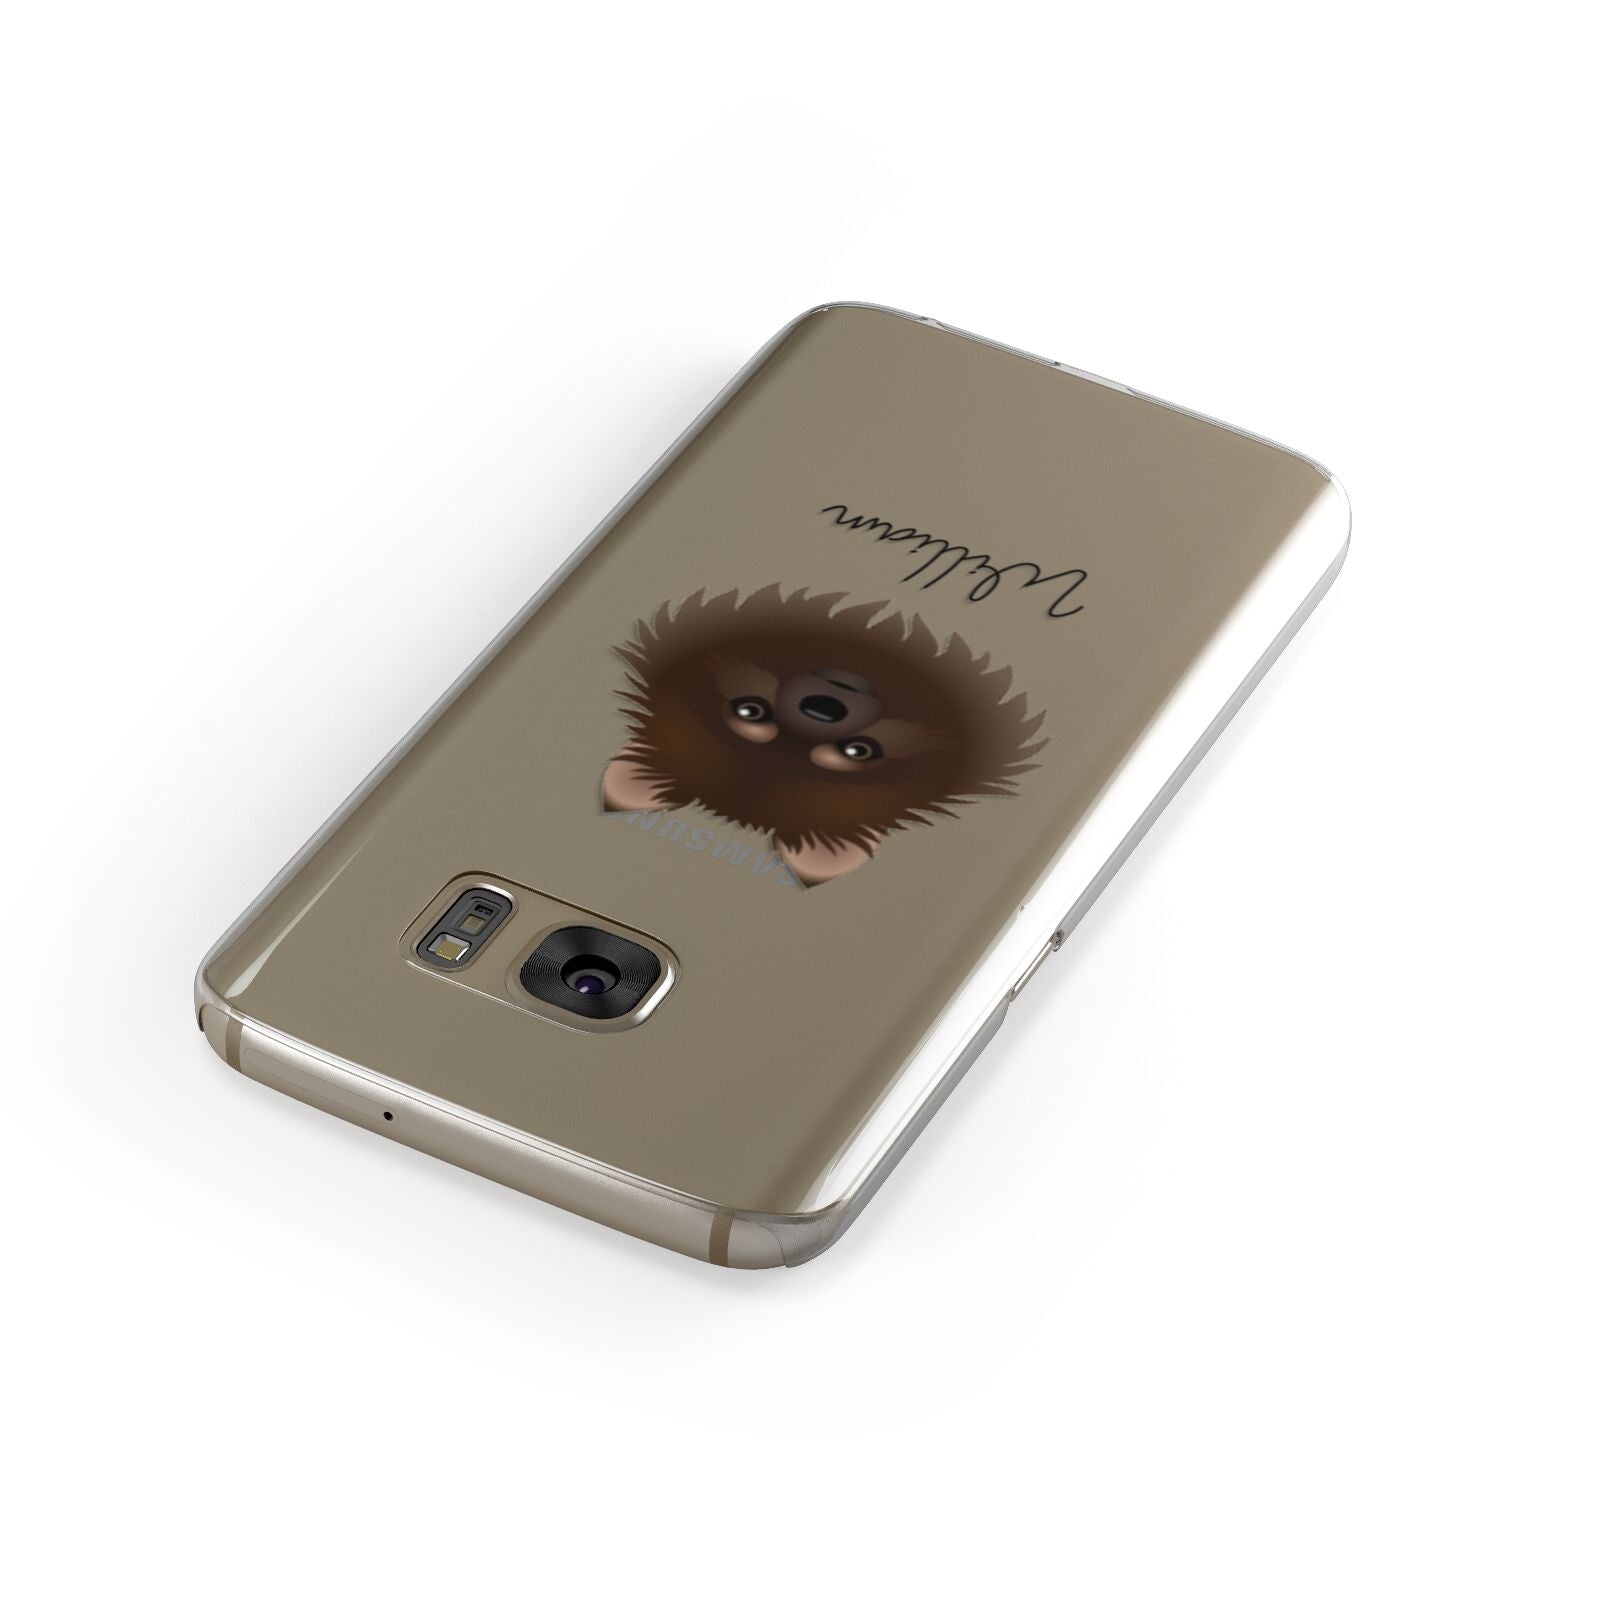 Pomchi Personalised Samsung Galaxy Case Front Close Up